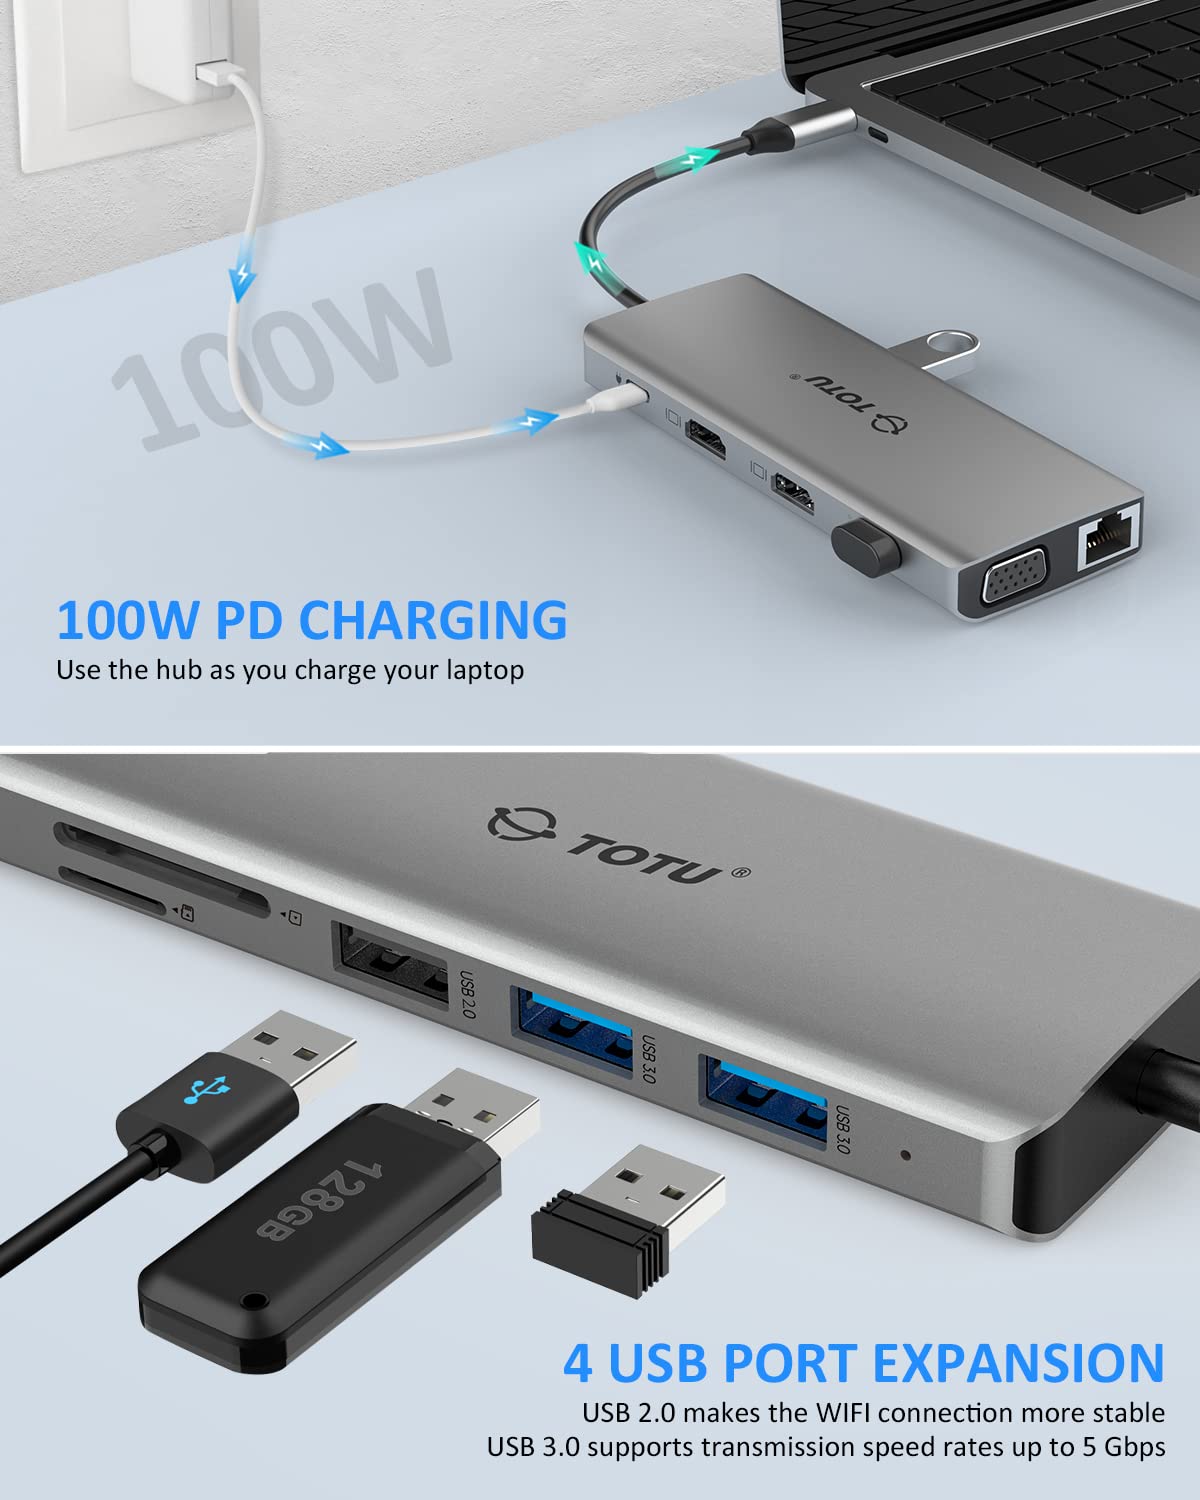 USB C Hub, TOTU 13-in-1 Type C Hub with Ethernet, 4K USB C to 2 HDMI, VGA, 2 USB 3.0, 2 USB 2.0, 100W PD, SD/TF Cards Reader, Mic/Audio Docking Station for MacBook Pro Air XPS and Other USB-C Laptops